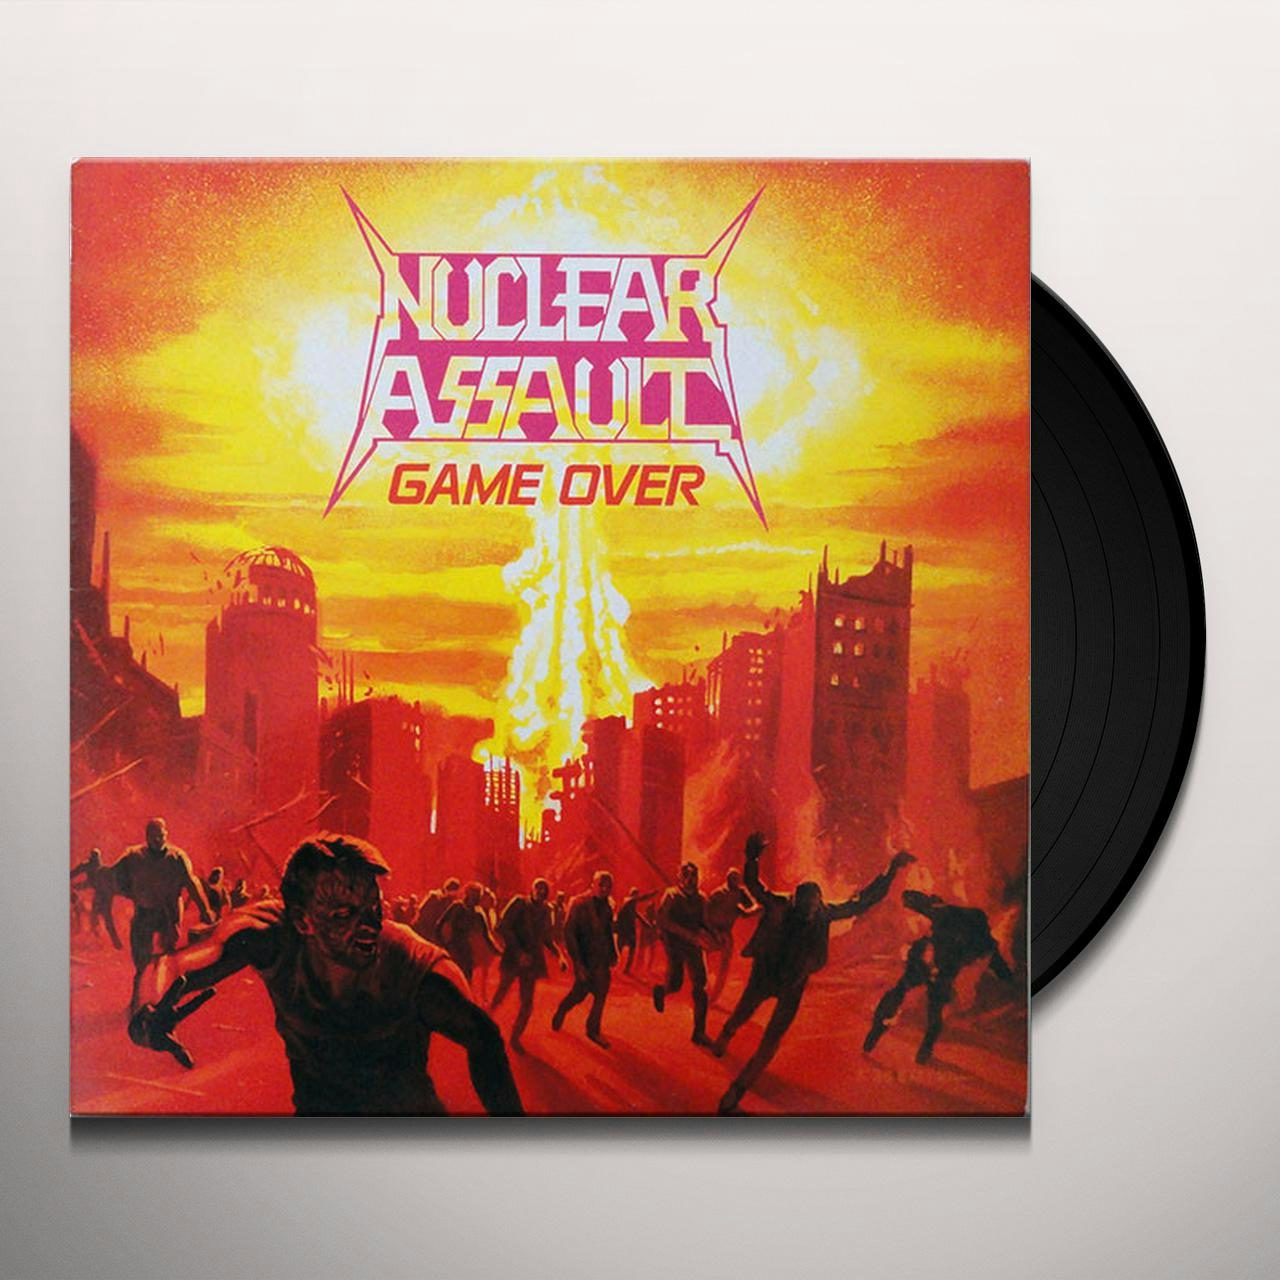 Nuclear Assault CD - Game Over $25.49